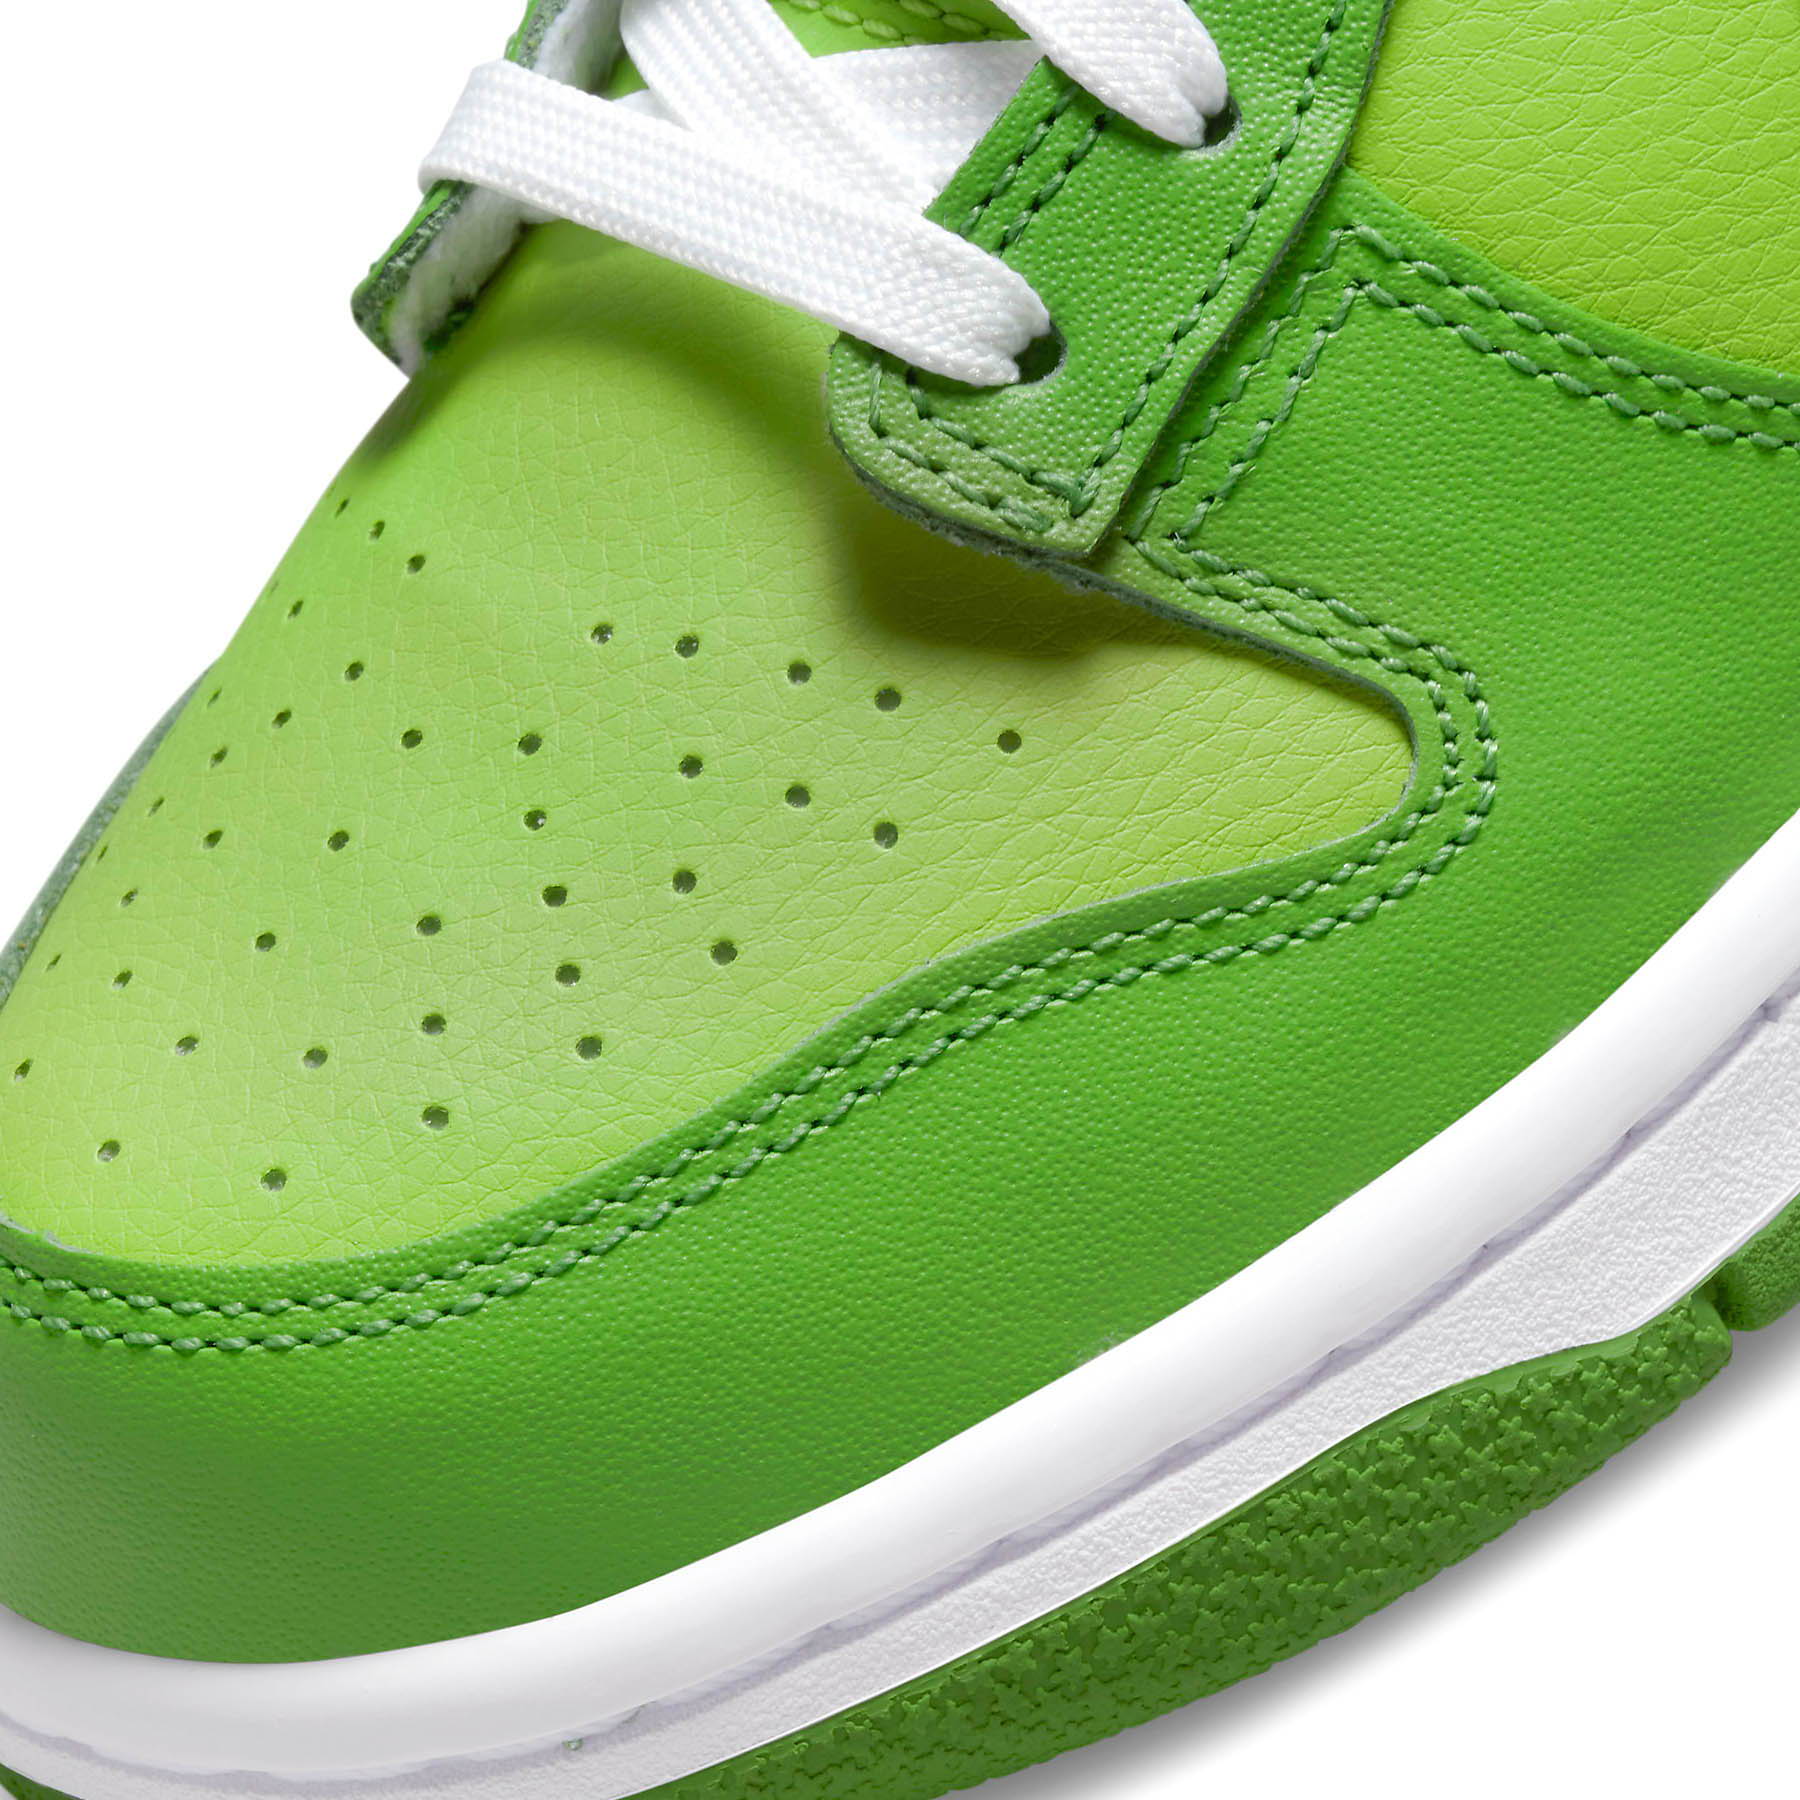 Double Boxed  199.99 Nike Dunk Low Chlorophyll Double Boxed